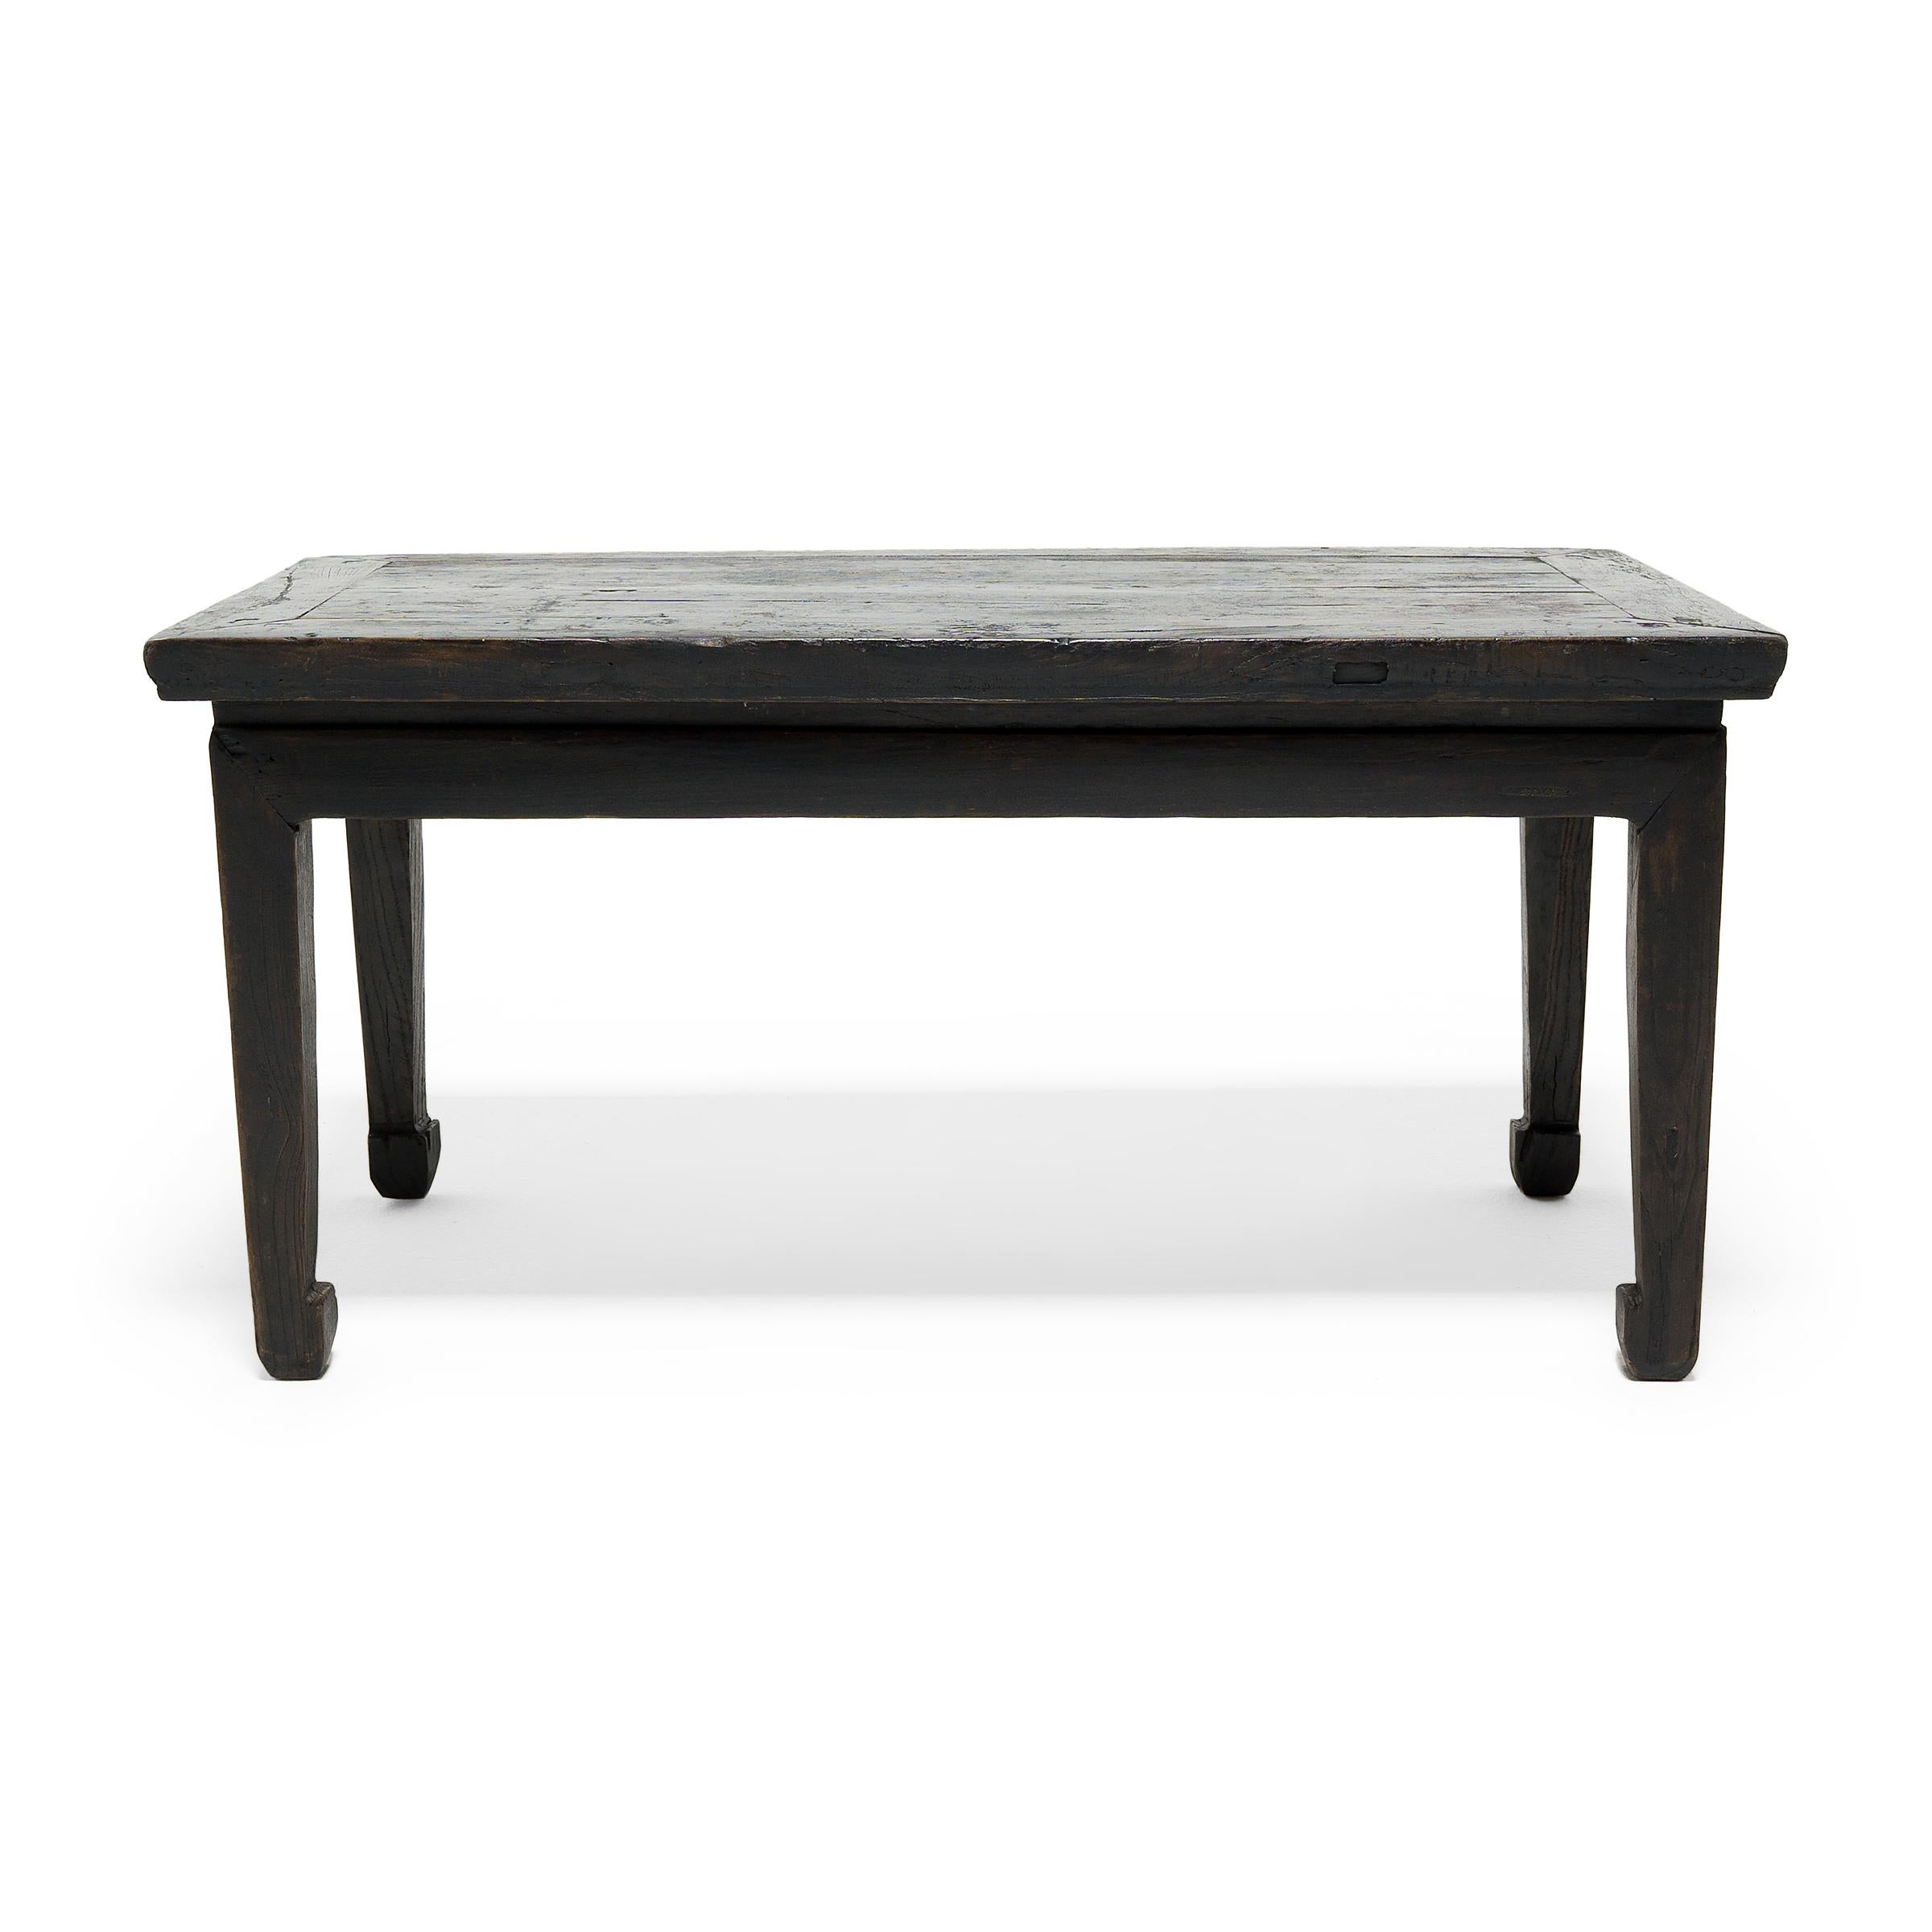 With clean lines and a simple Silhouette, this 19th century half table from Shanxi province expresses the restraint of classical Chinese furniture design. Crafted of northern elm (yumu) with mortise-and-tenon joinery, the table's streamlined form